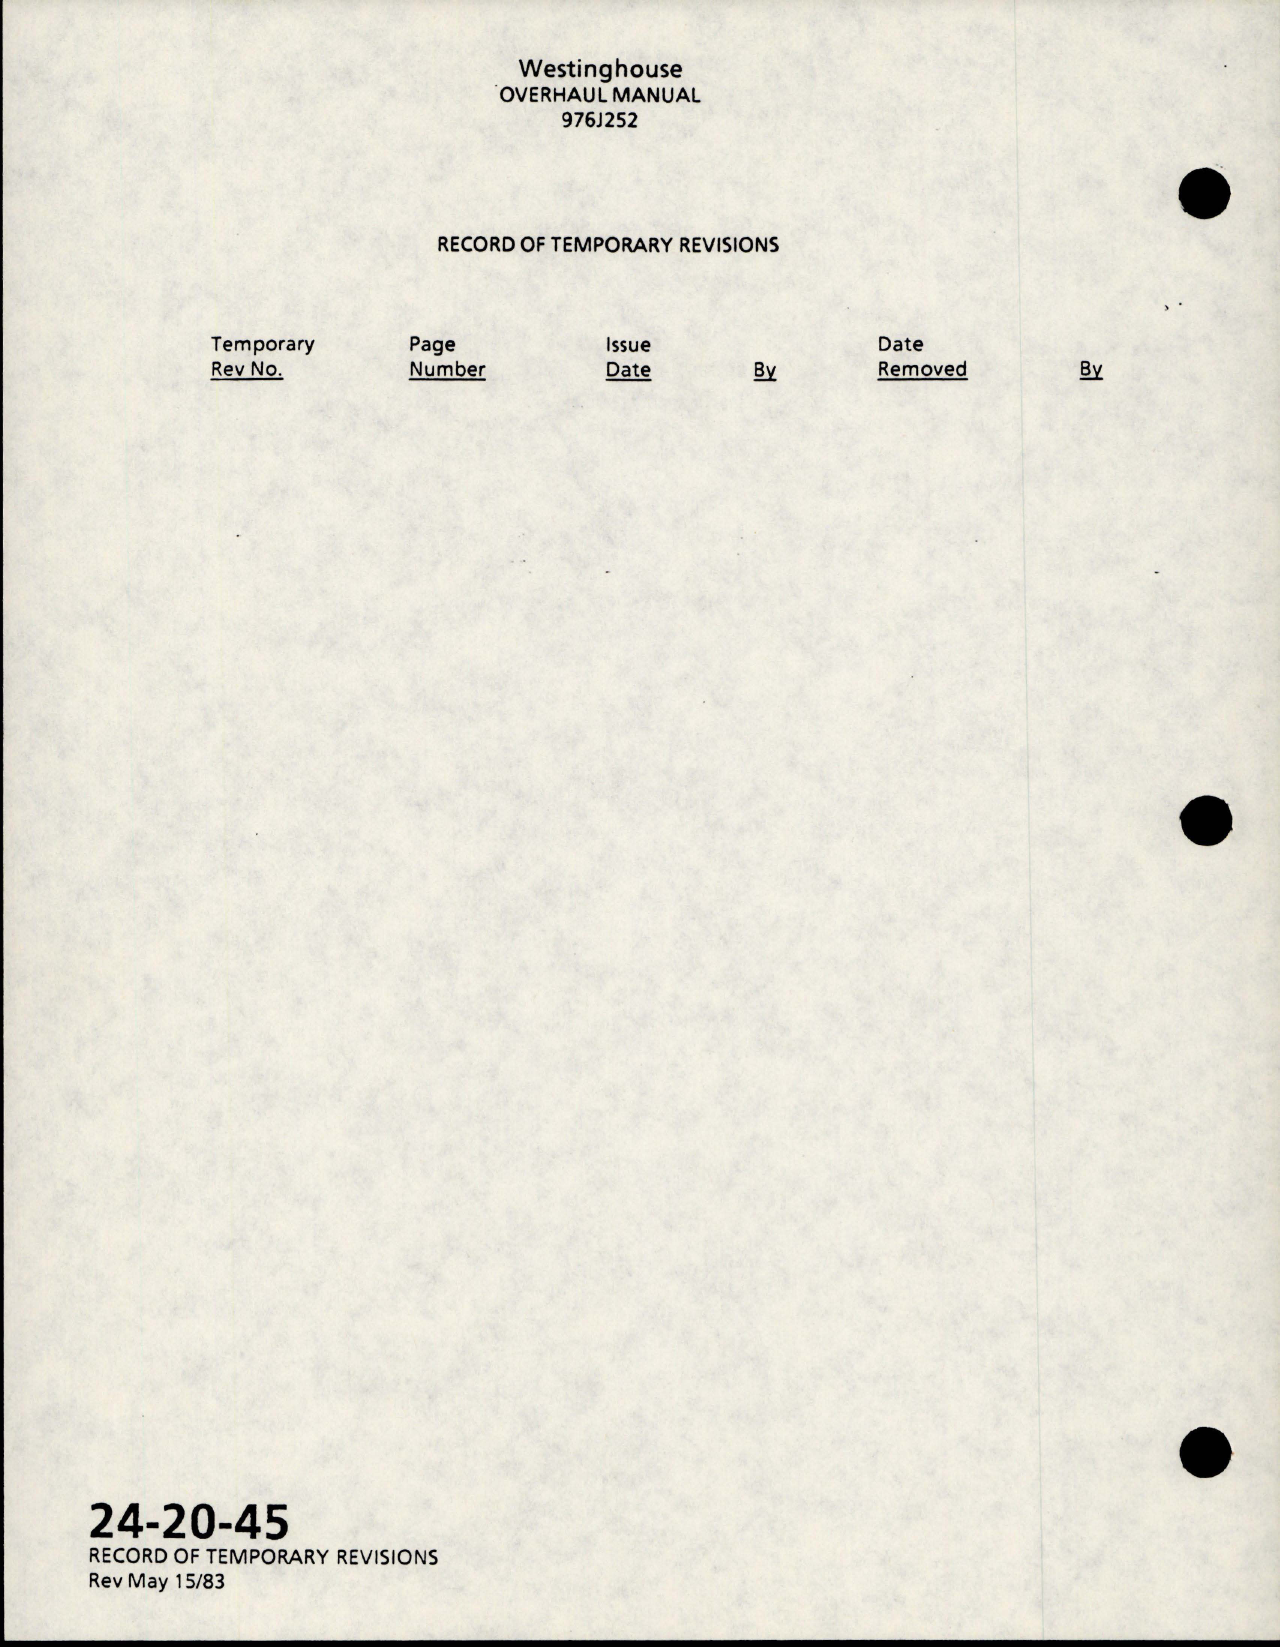 Sample page 8 from AirCorps Library document: Maintenance Manual w Parts List for AC Generator - Parts 976J252-3 and 976J252-6